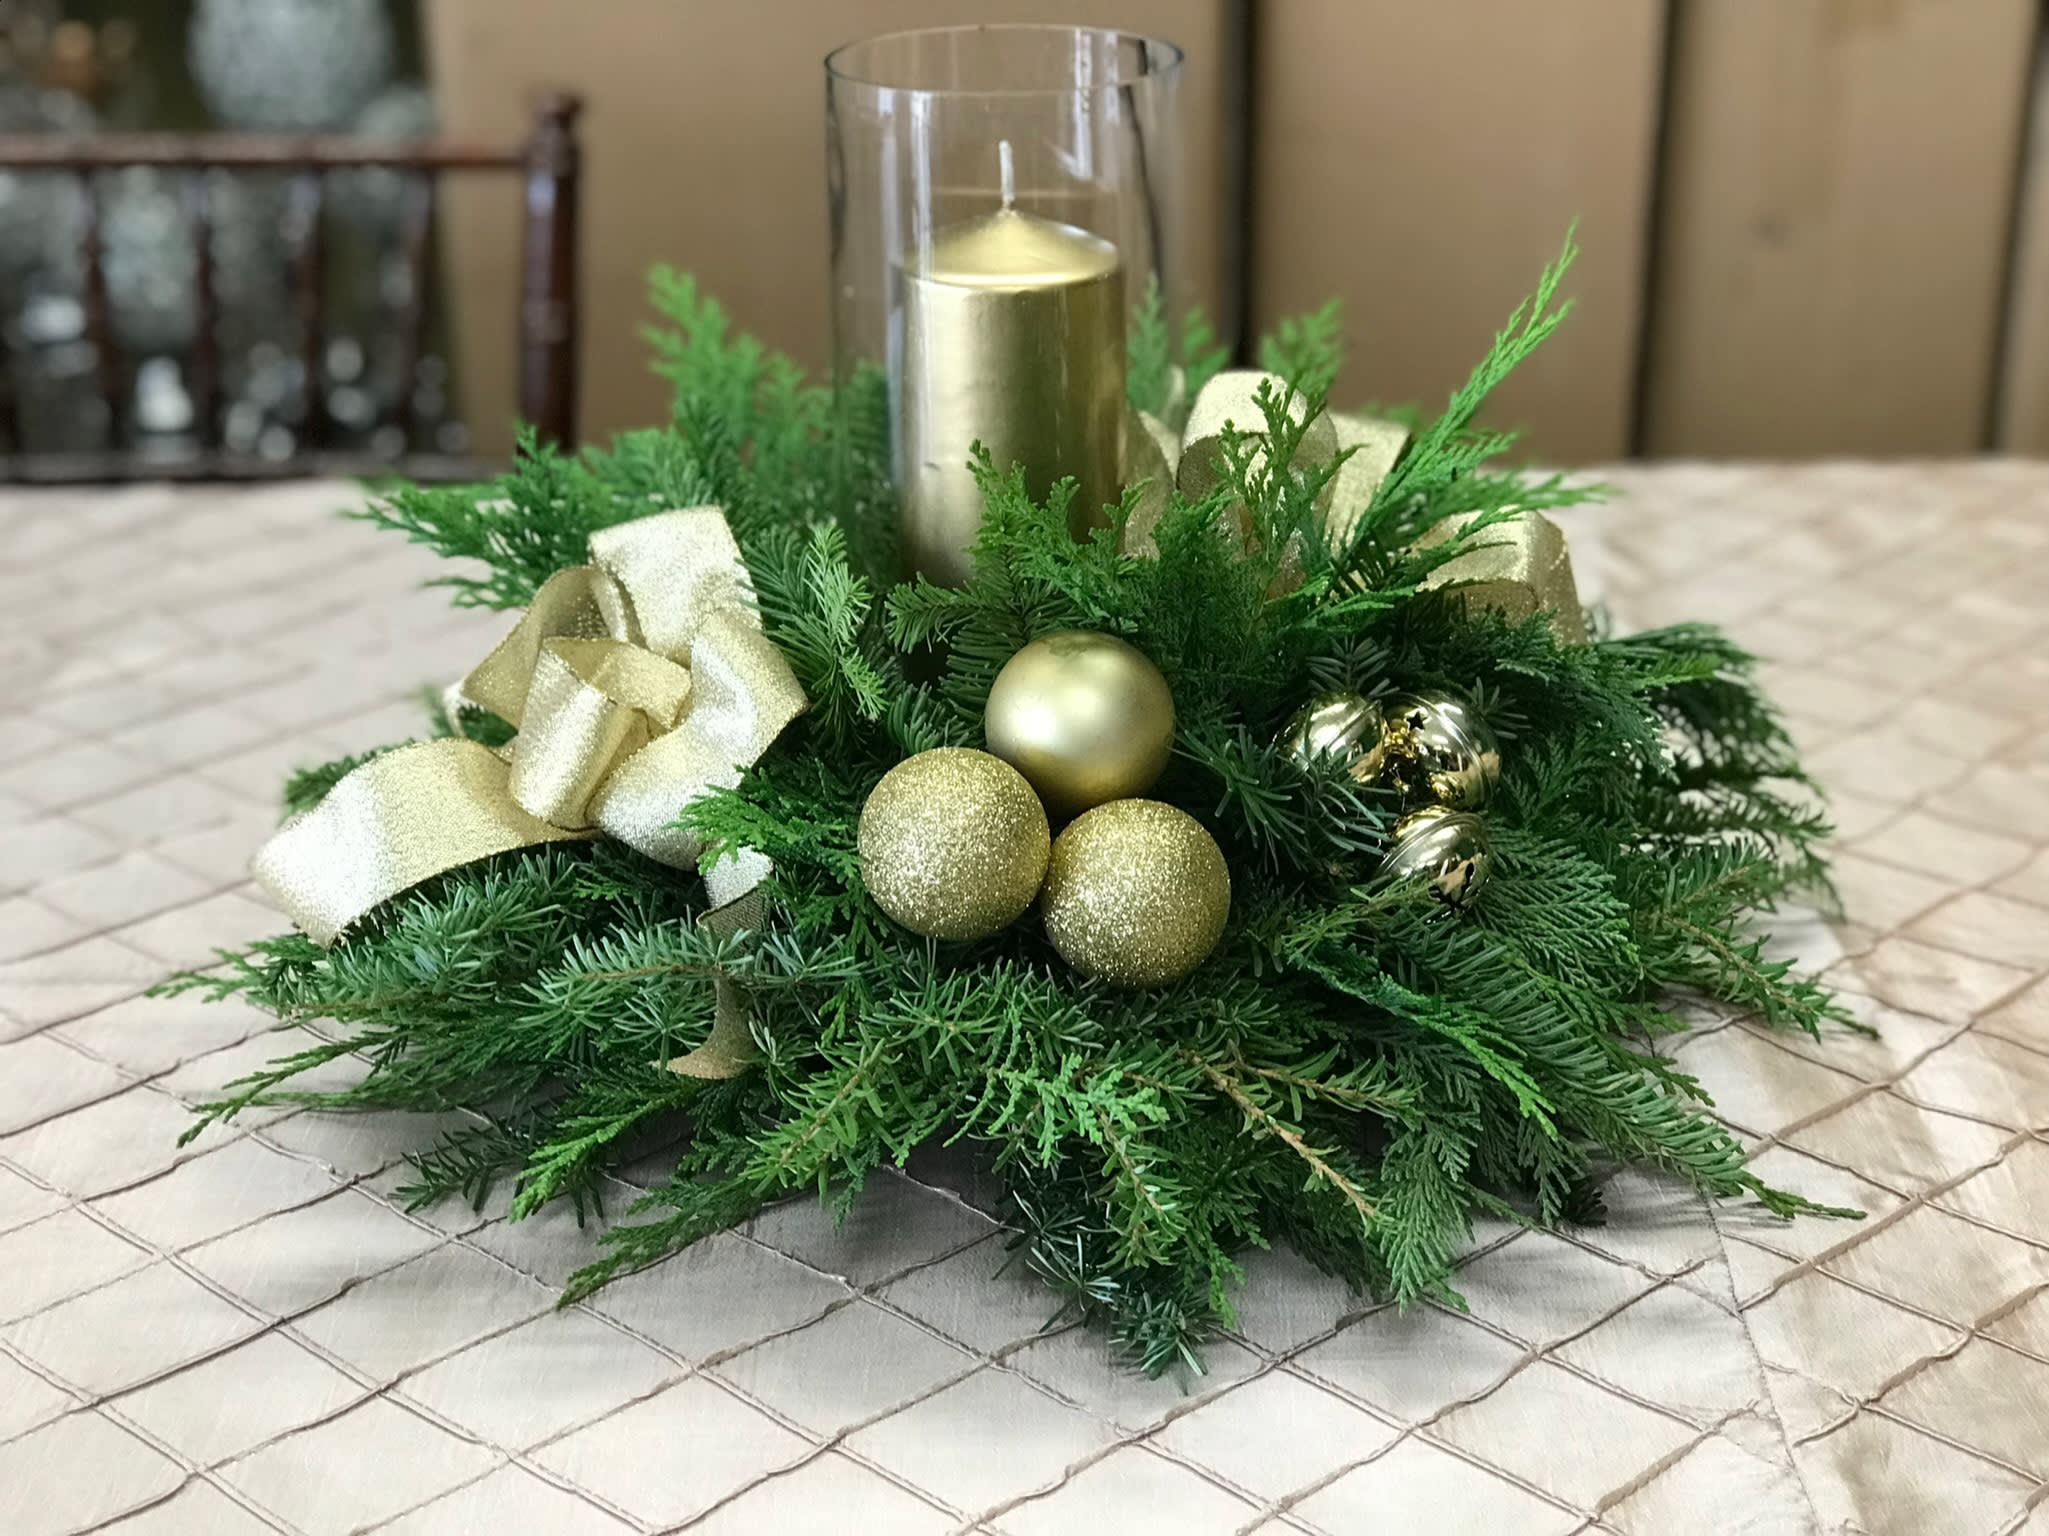 Christmas Gold Centerpiece  - Christmas Greens featuring a gold candle, ornaments and decor. Can be done in other colors is desired. 